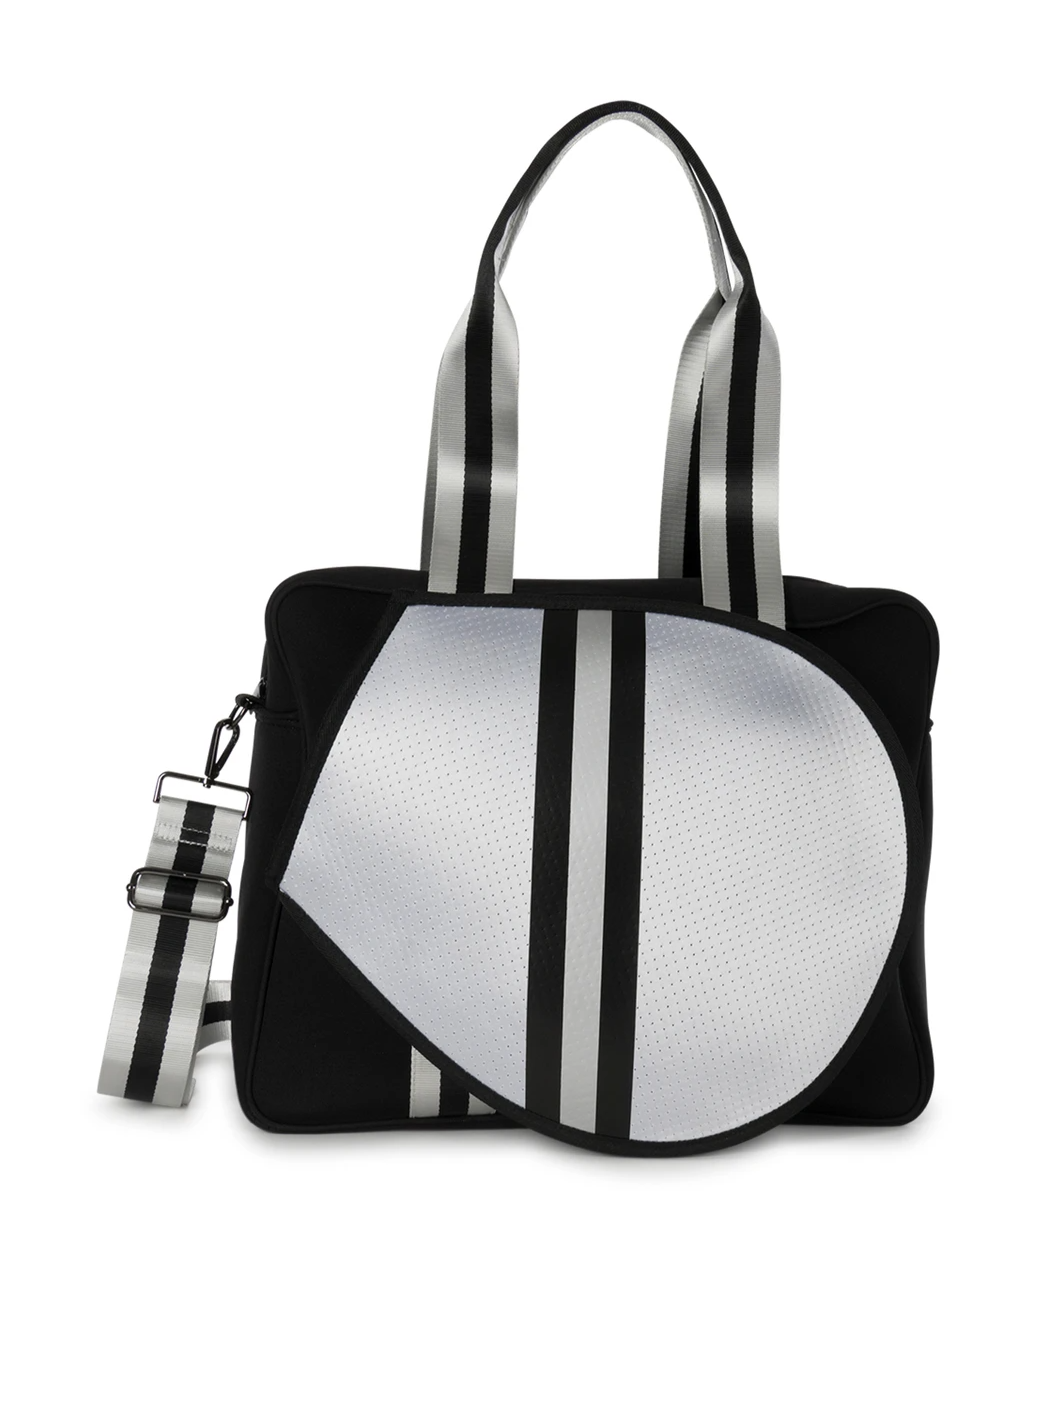 Haute Shore Neoprene Billie Tennis Bag in City colorway, silver with black and grey details